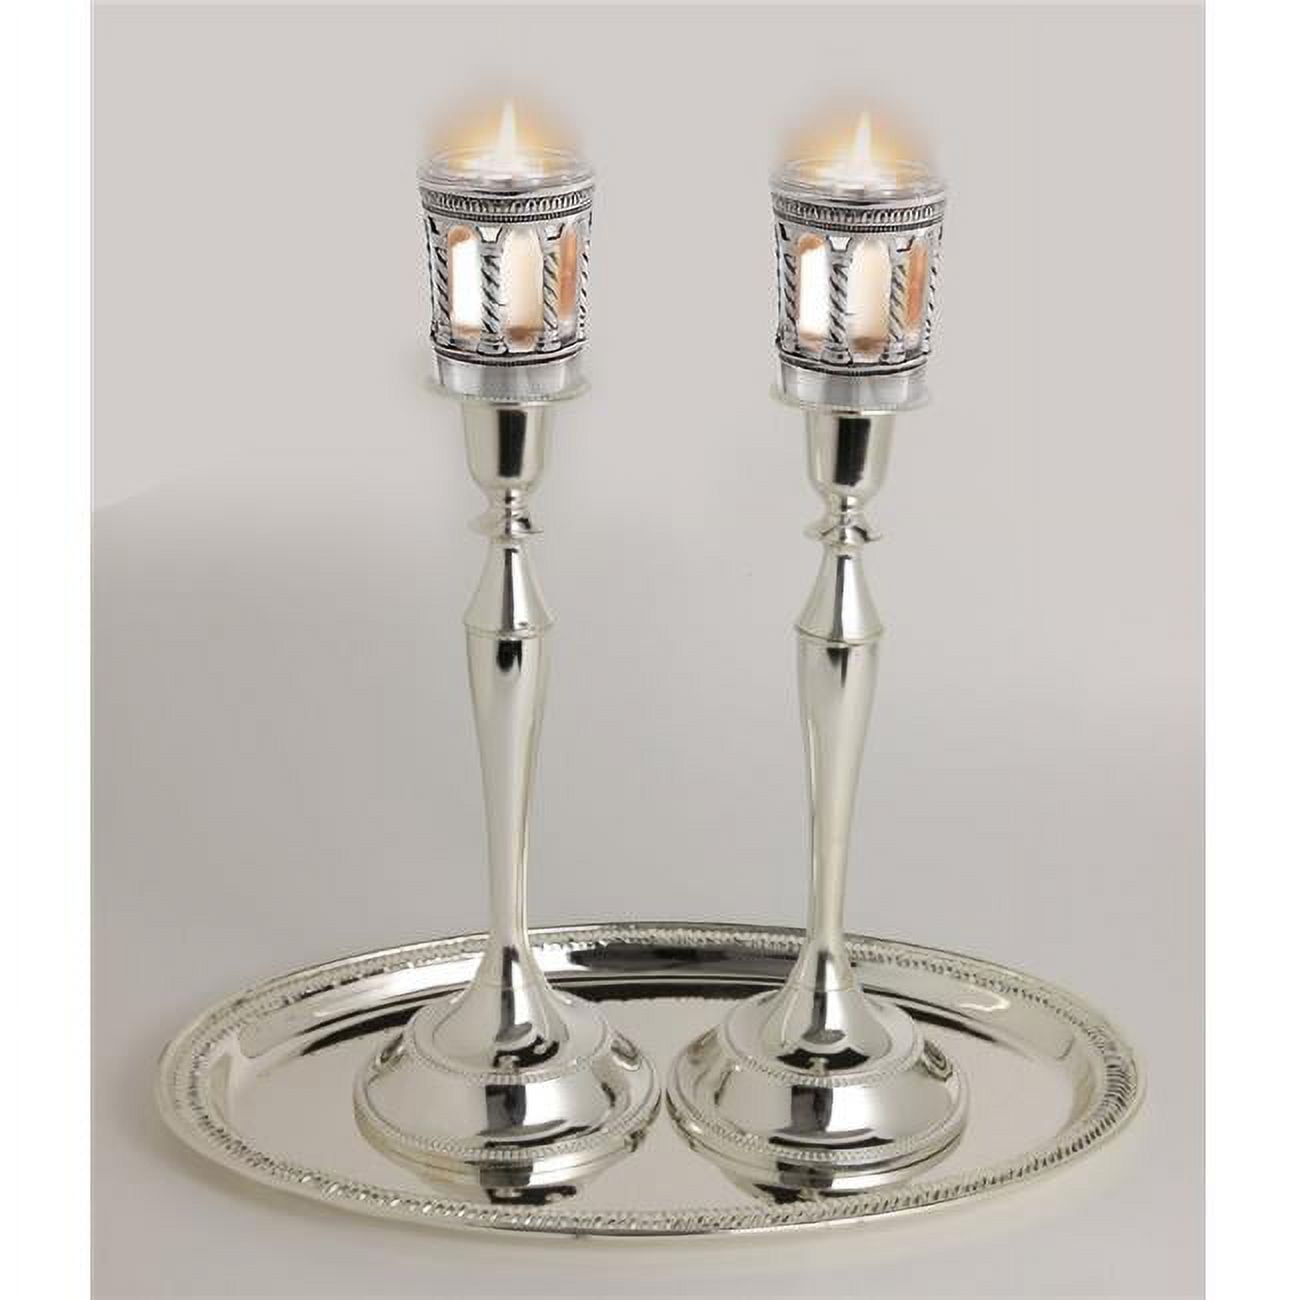 Picture of Nua 58132 13.5 in. Safety Candle Sticks with Neronim Holder Attached